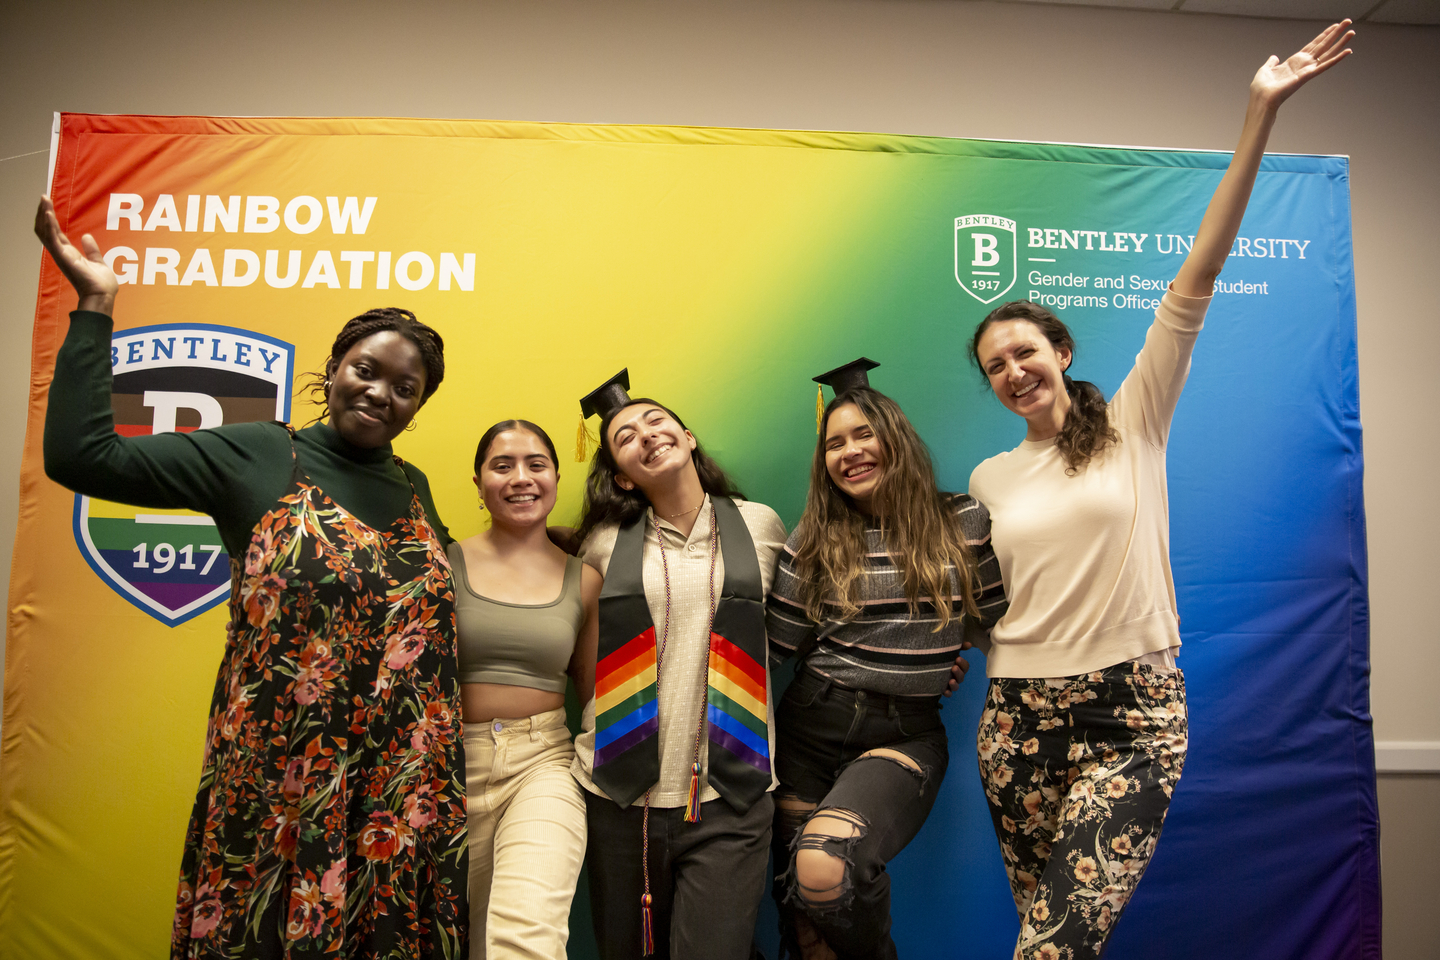 Staff and students in front of a rainbow backdrop celebrating